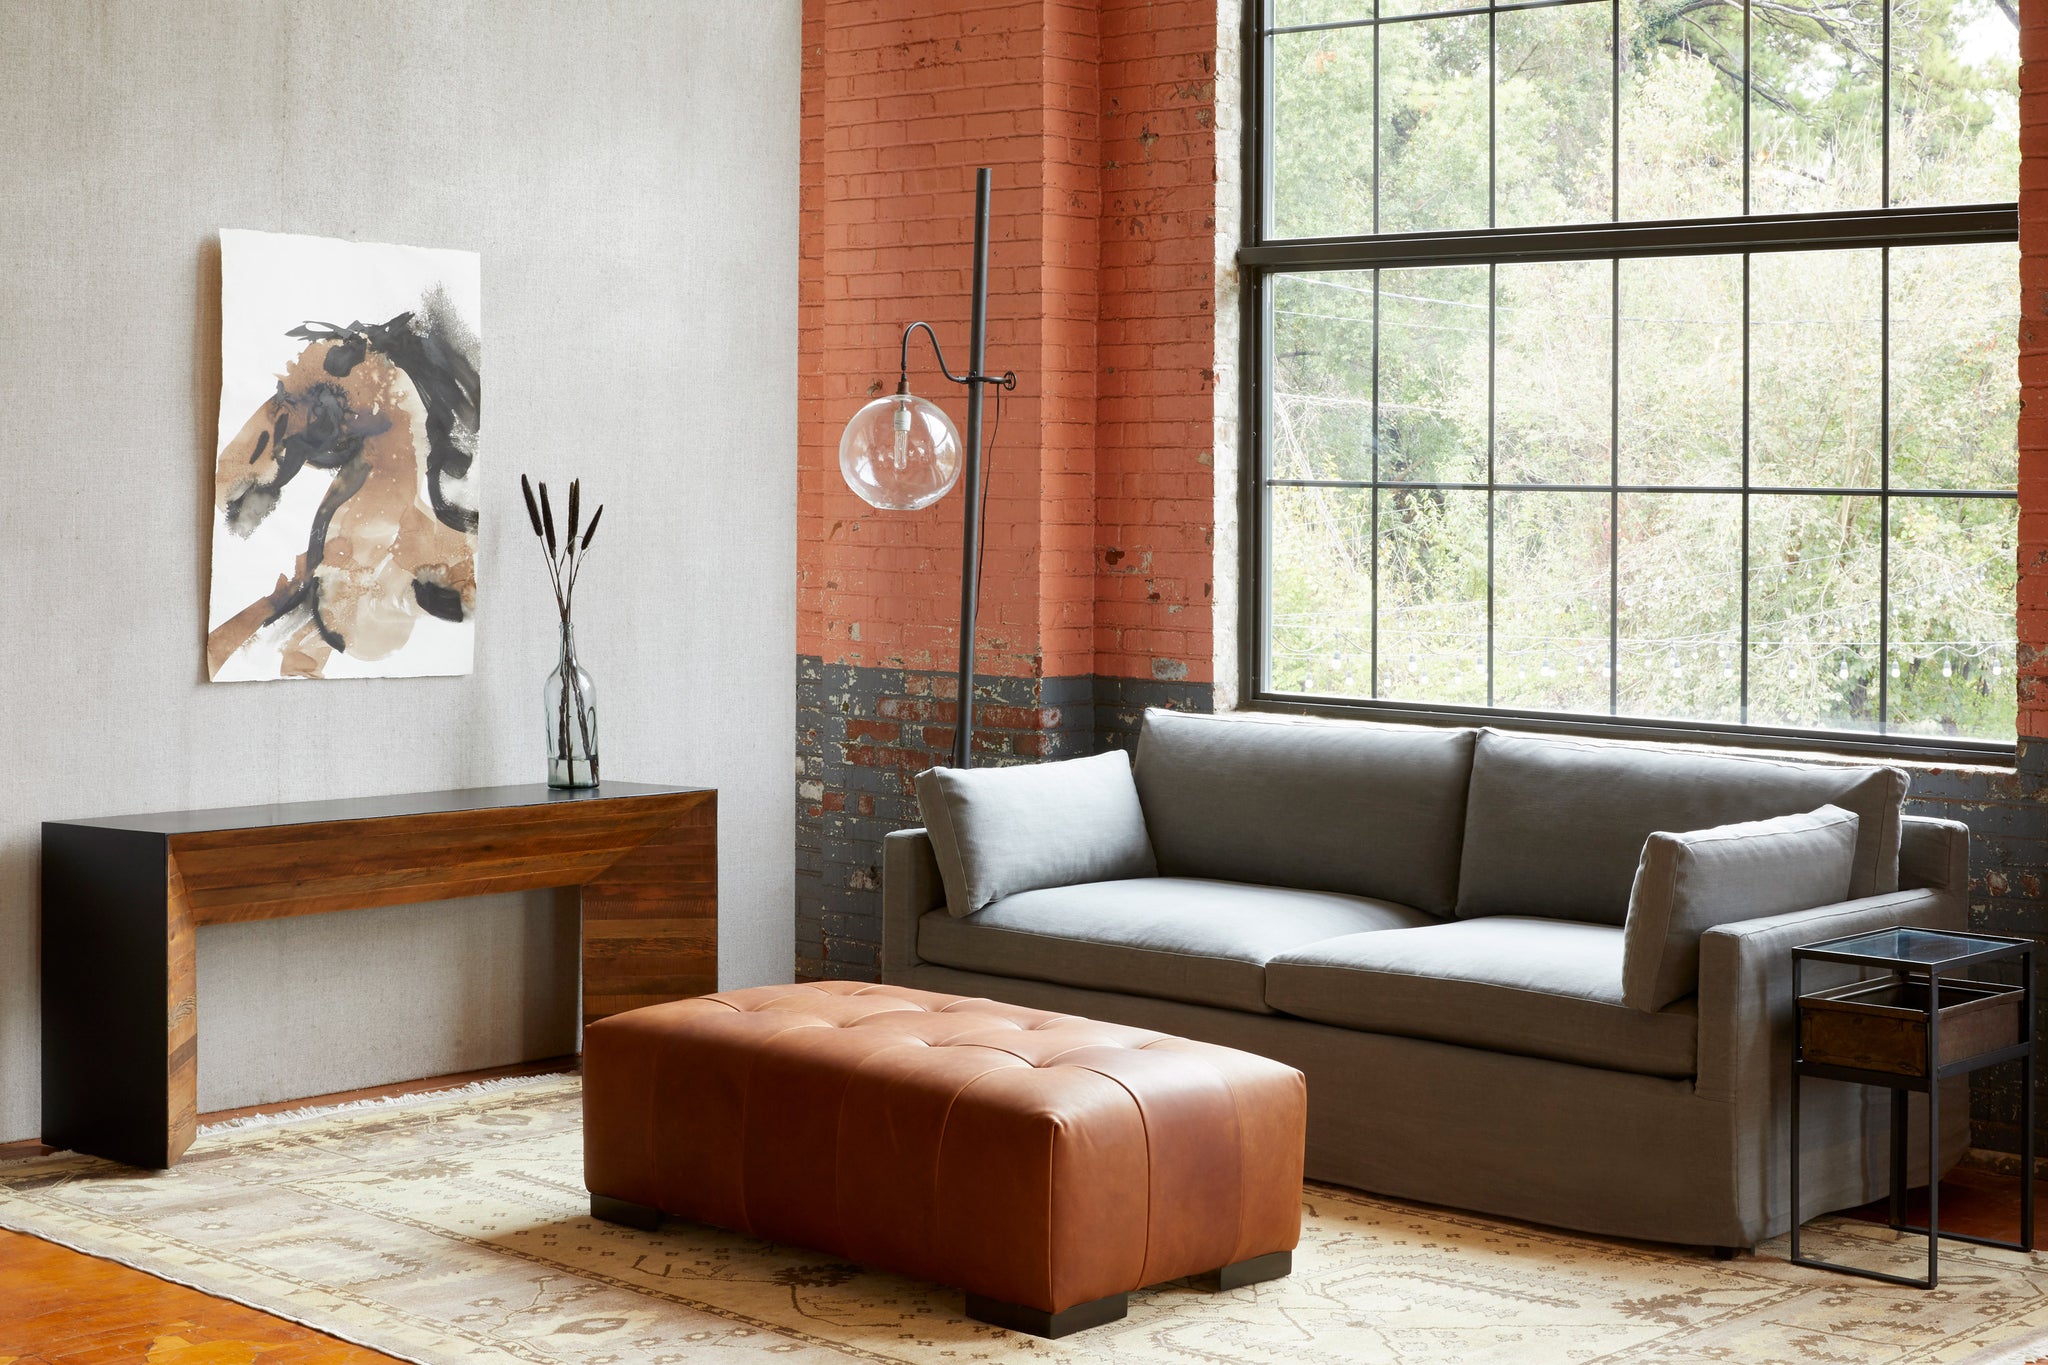  Arden bench in Spur Terracotta next to a grey sofa. In the background is a brick wall with a big window, There is also a floor lamp next to the sofa. Photographed in Spur Terracotta. 